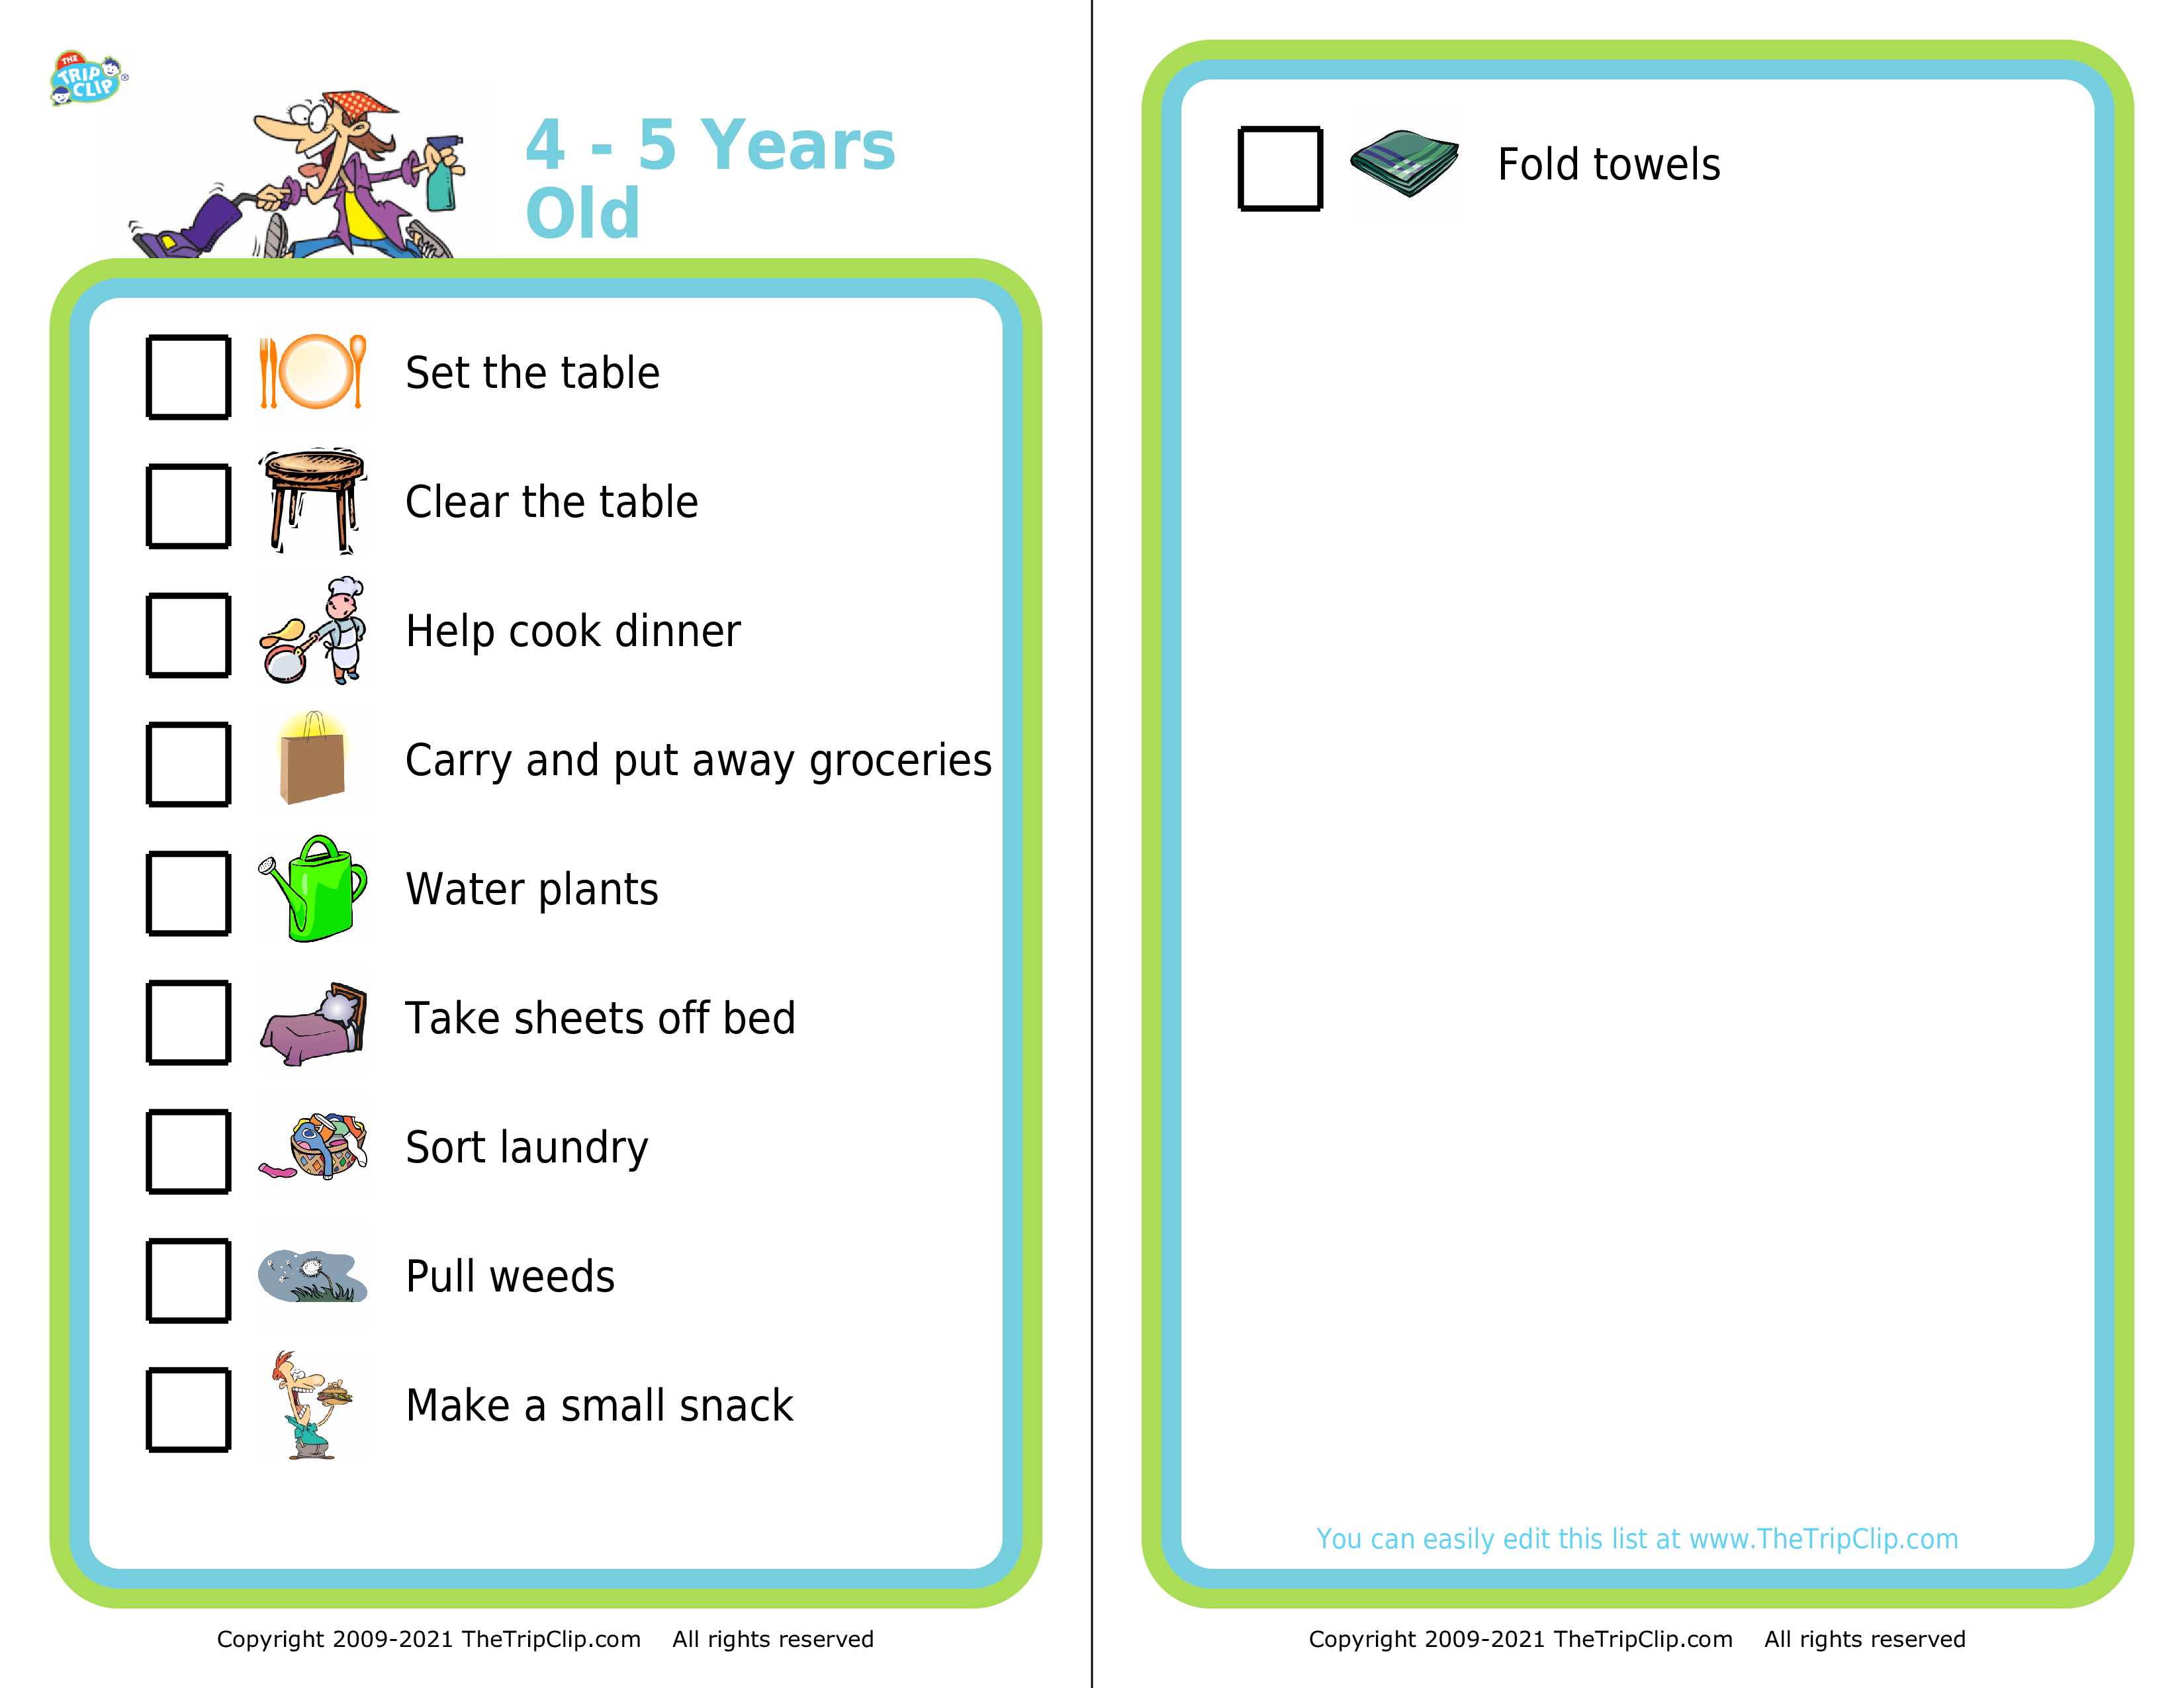 Picture checklist with chores appropriate for four to five year olds